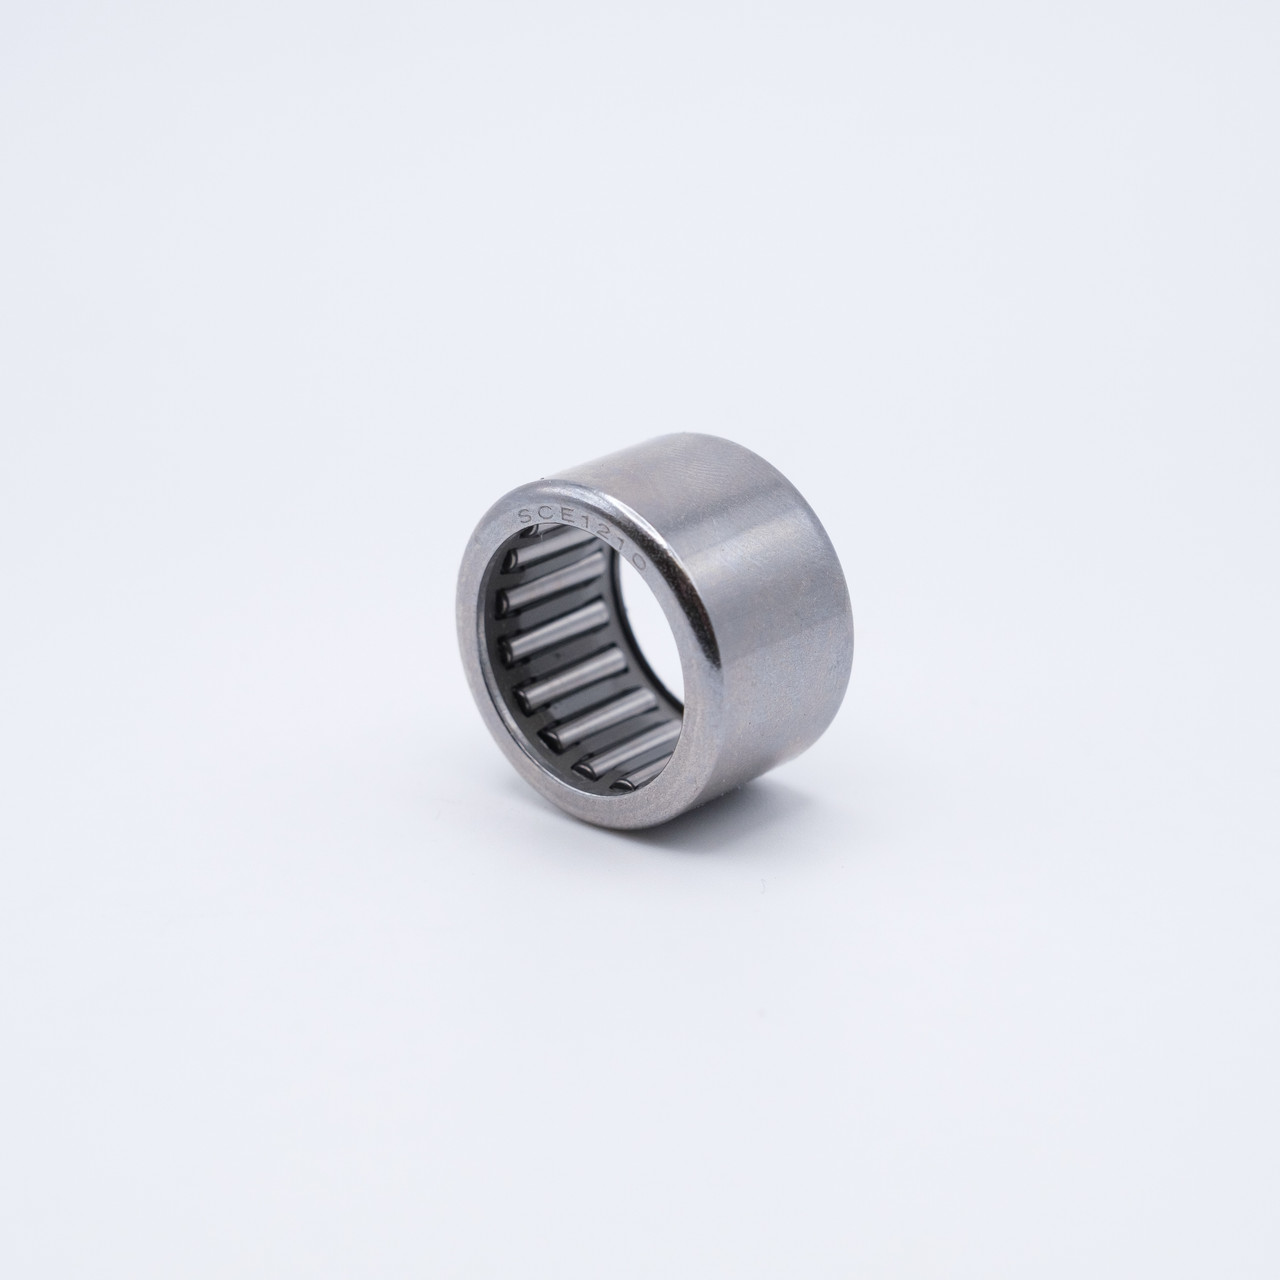 J-1716 Needle Rollers Bearing 1-1/16x1-5/16x1 Inches Side View